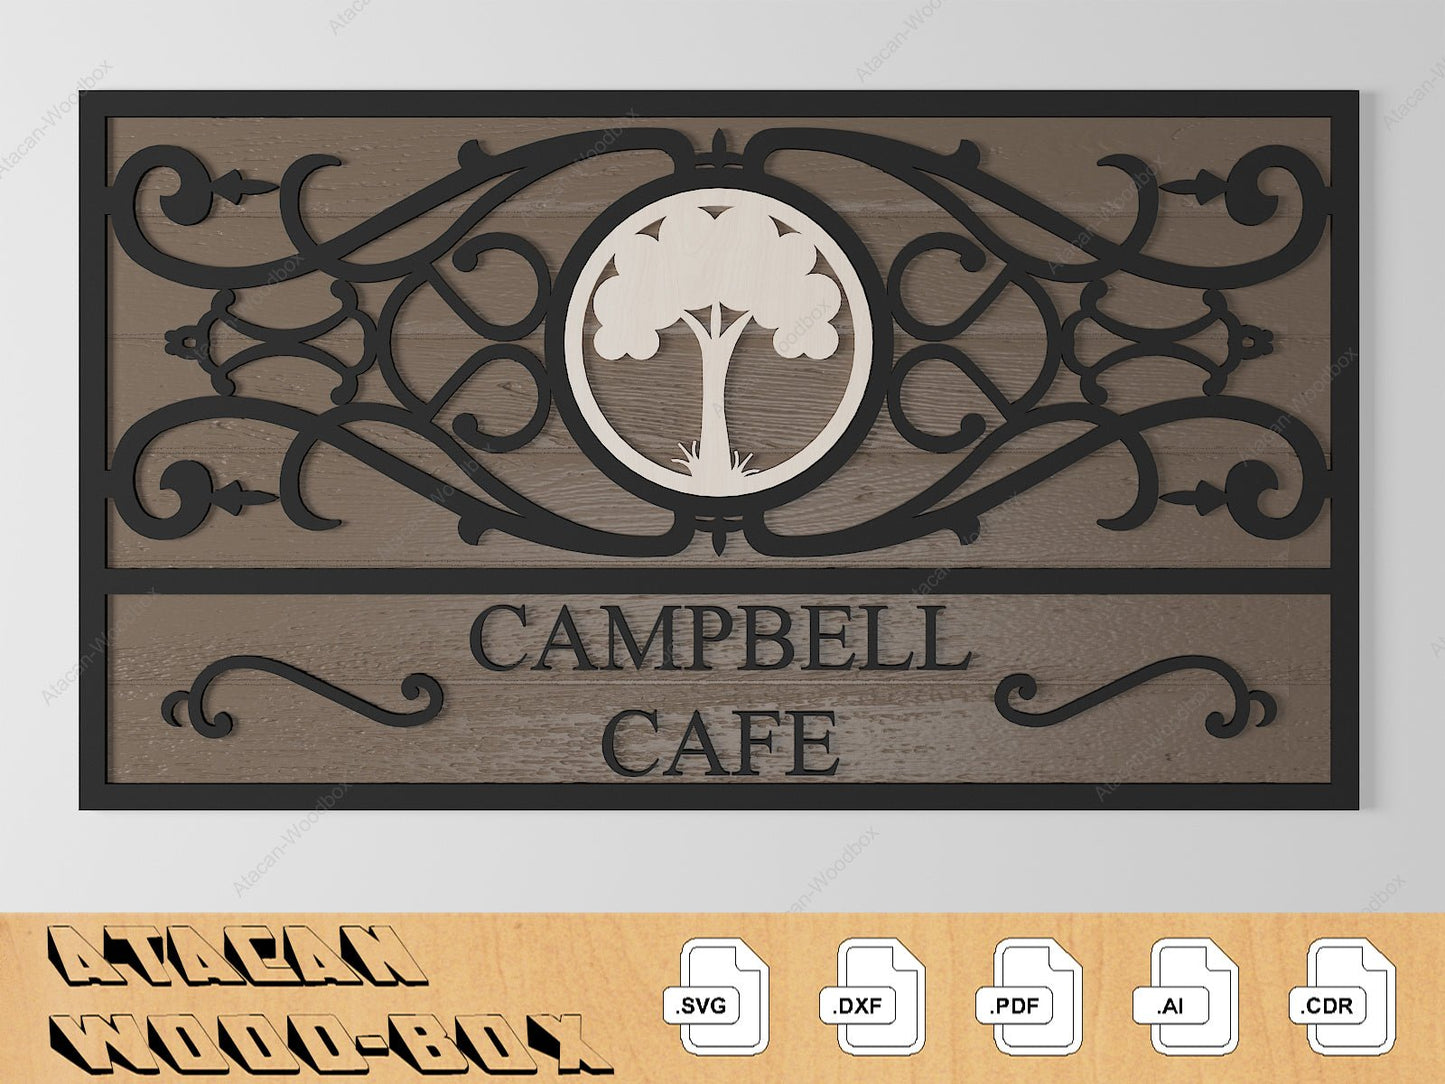 Custom Home Decor Signs / Interchangeable Letter and Icons / Monogram Personalise Laser Cut Files / Glowforge SVG DXF Ai CDR 340